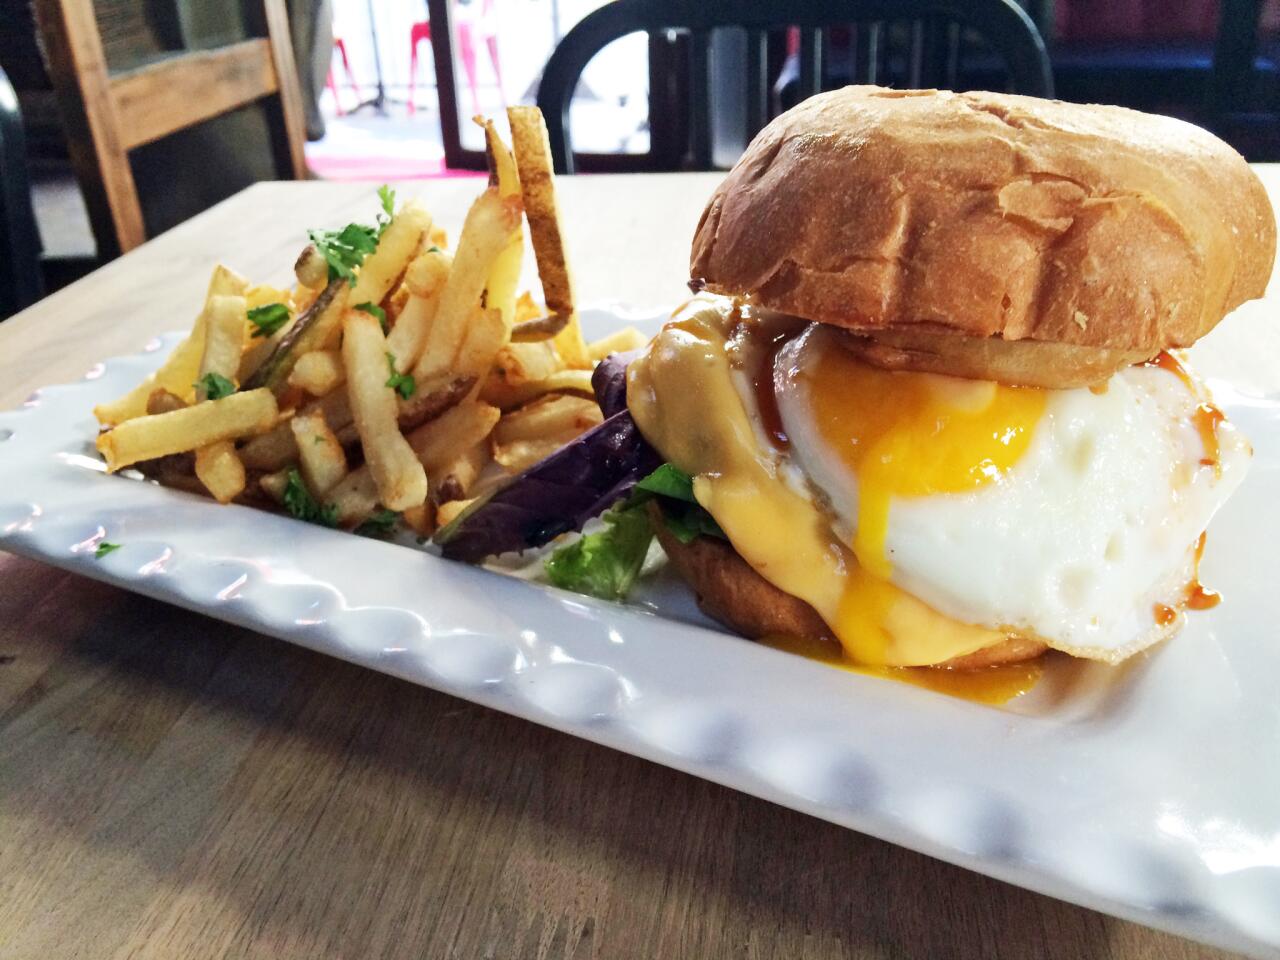 The Edwin Mills burger topped with cheddar cheese, a fried egg, onion rings and BBQ sauce.